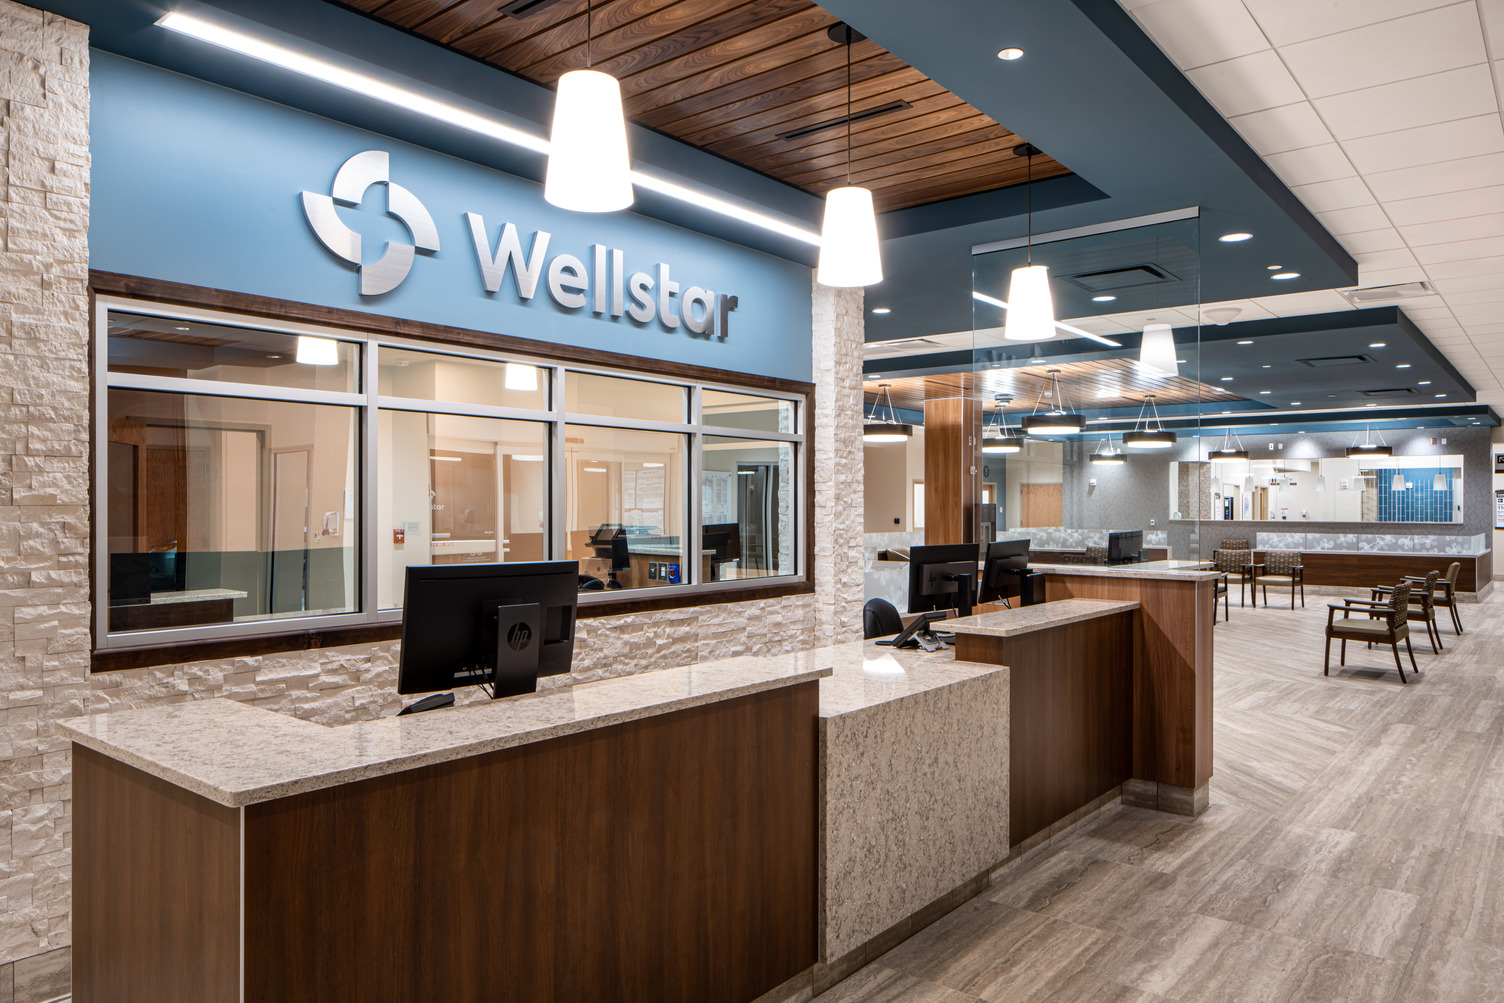 Wellstar Careers: How to Join the Wellstar Mission